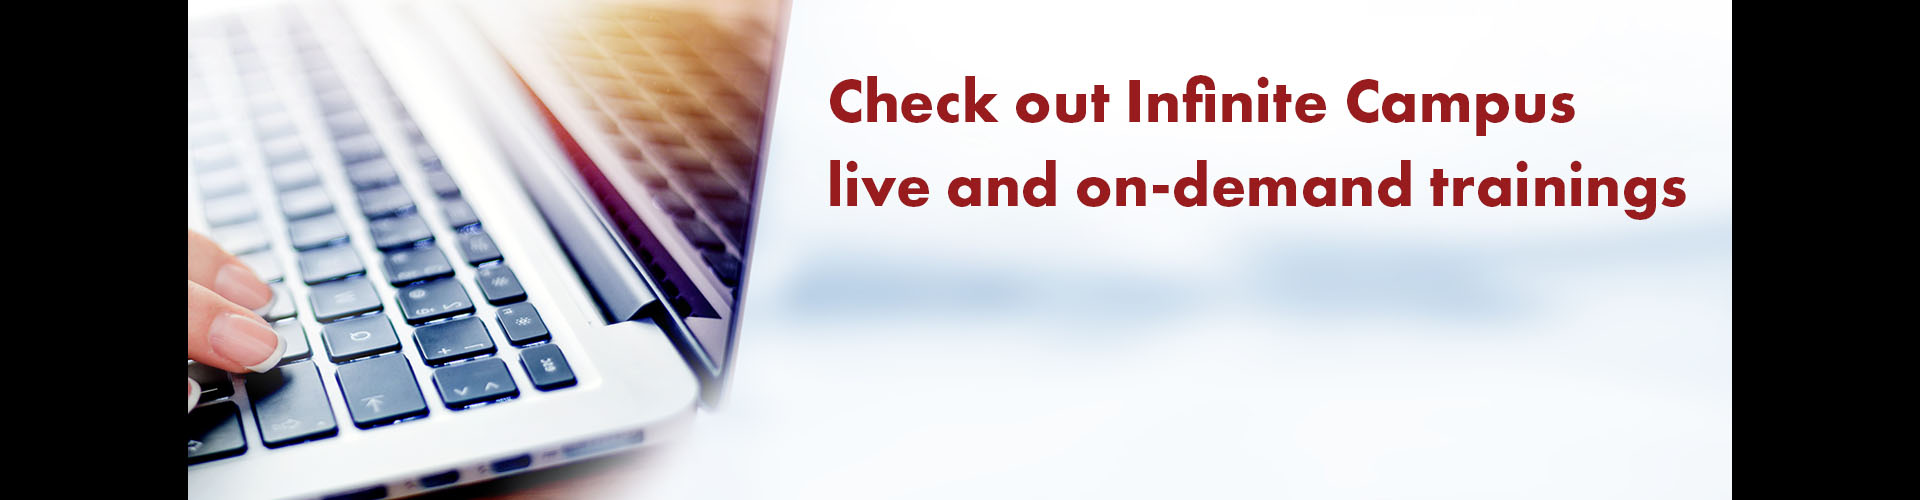 Check out Infinite Campus live and on-demand trainings. Link.